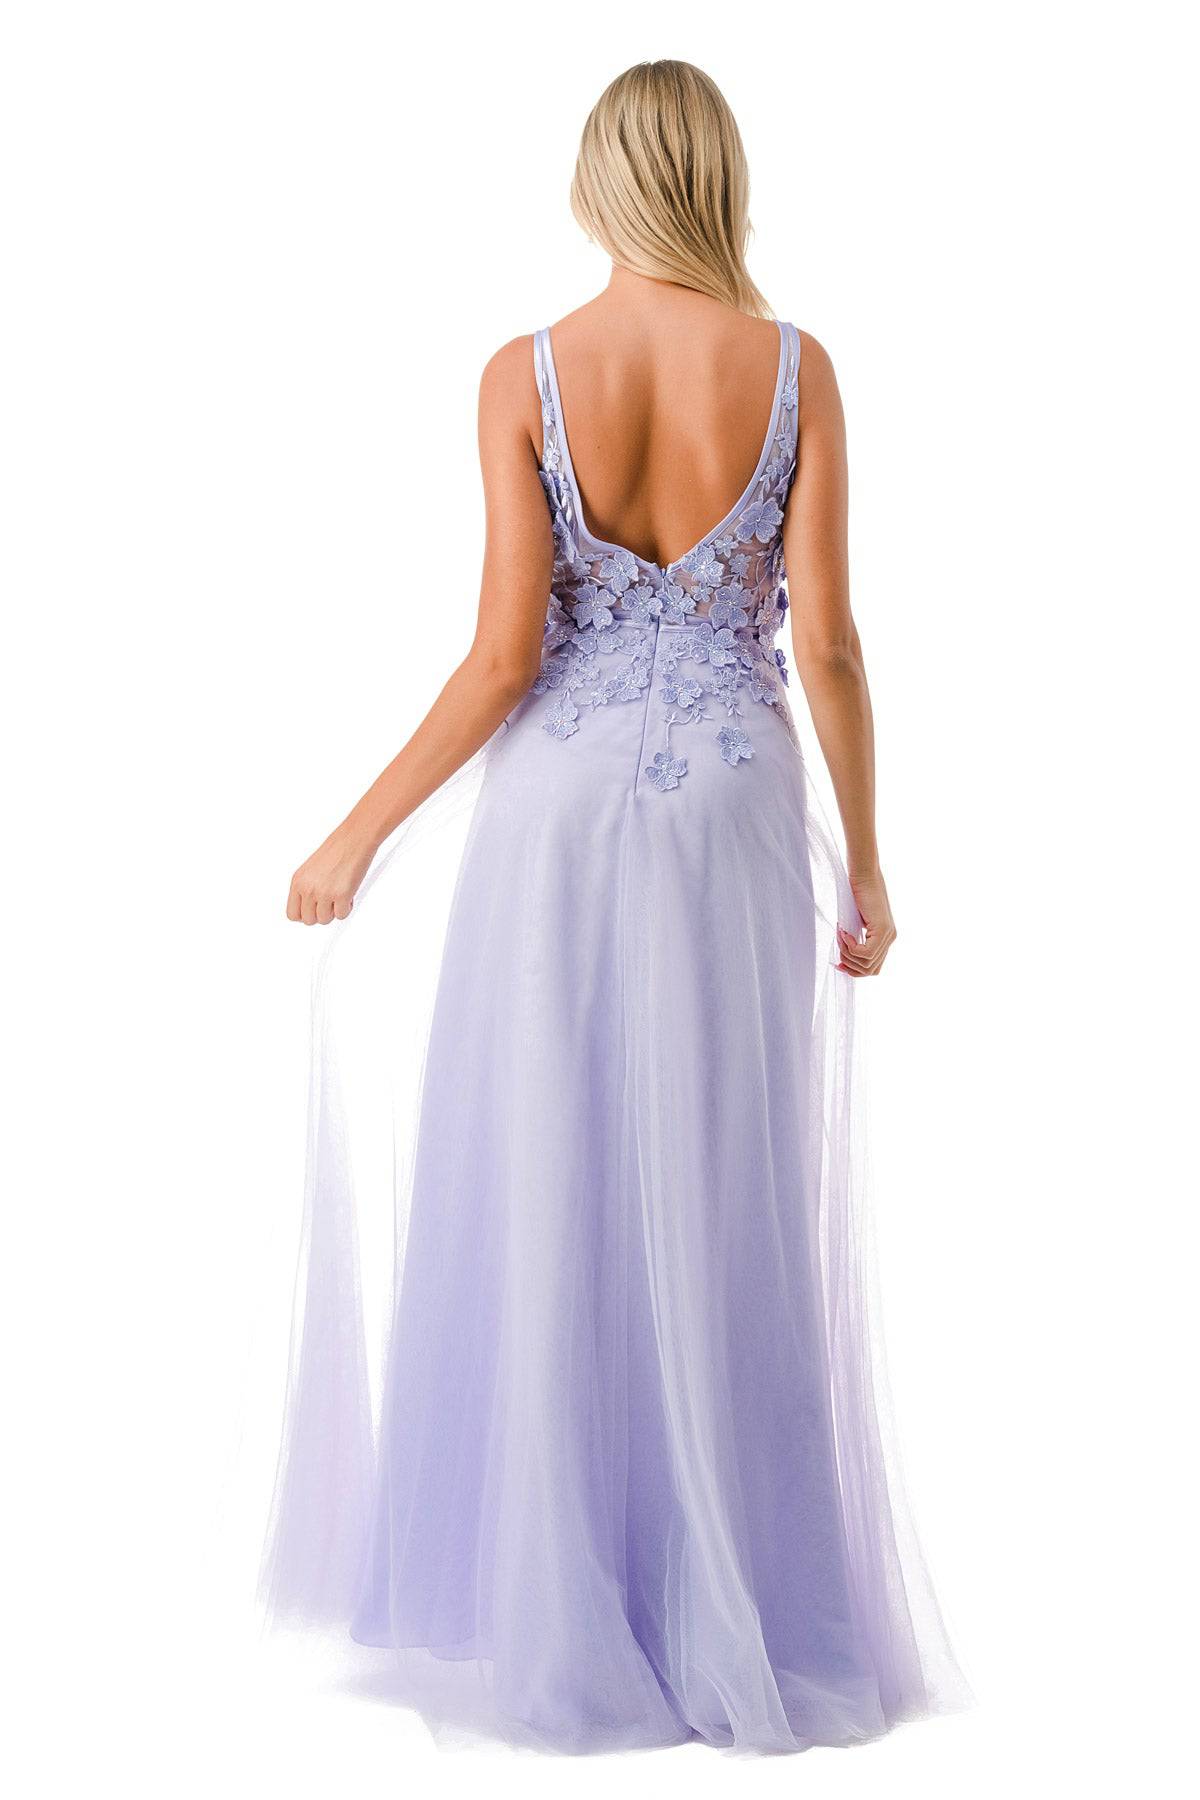 Aspeed P2114 Glittering Floral Inspired V Neck Tulle Dress - NORMA REED